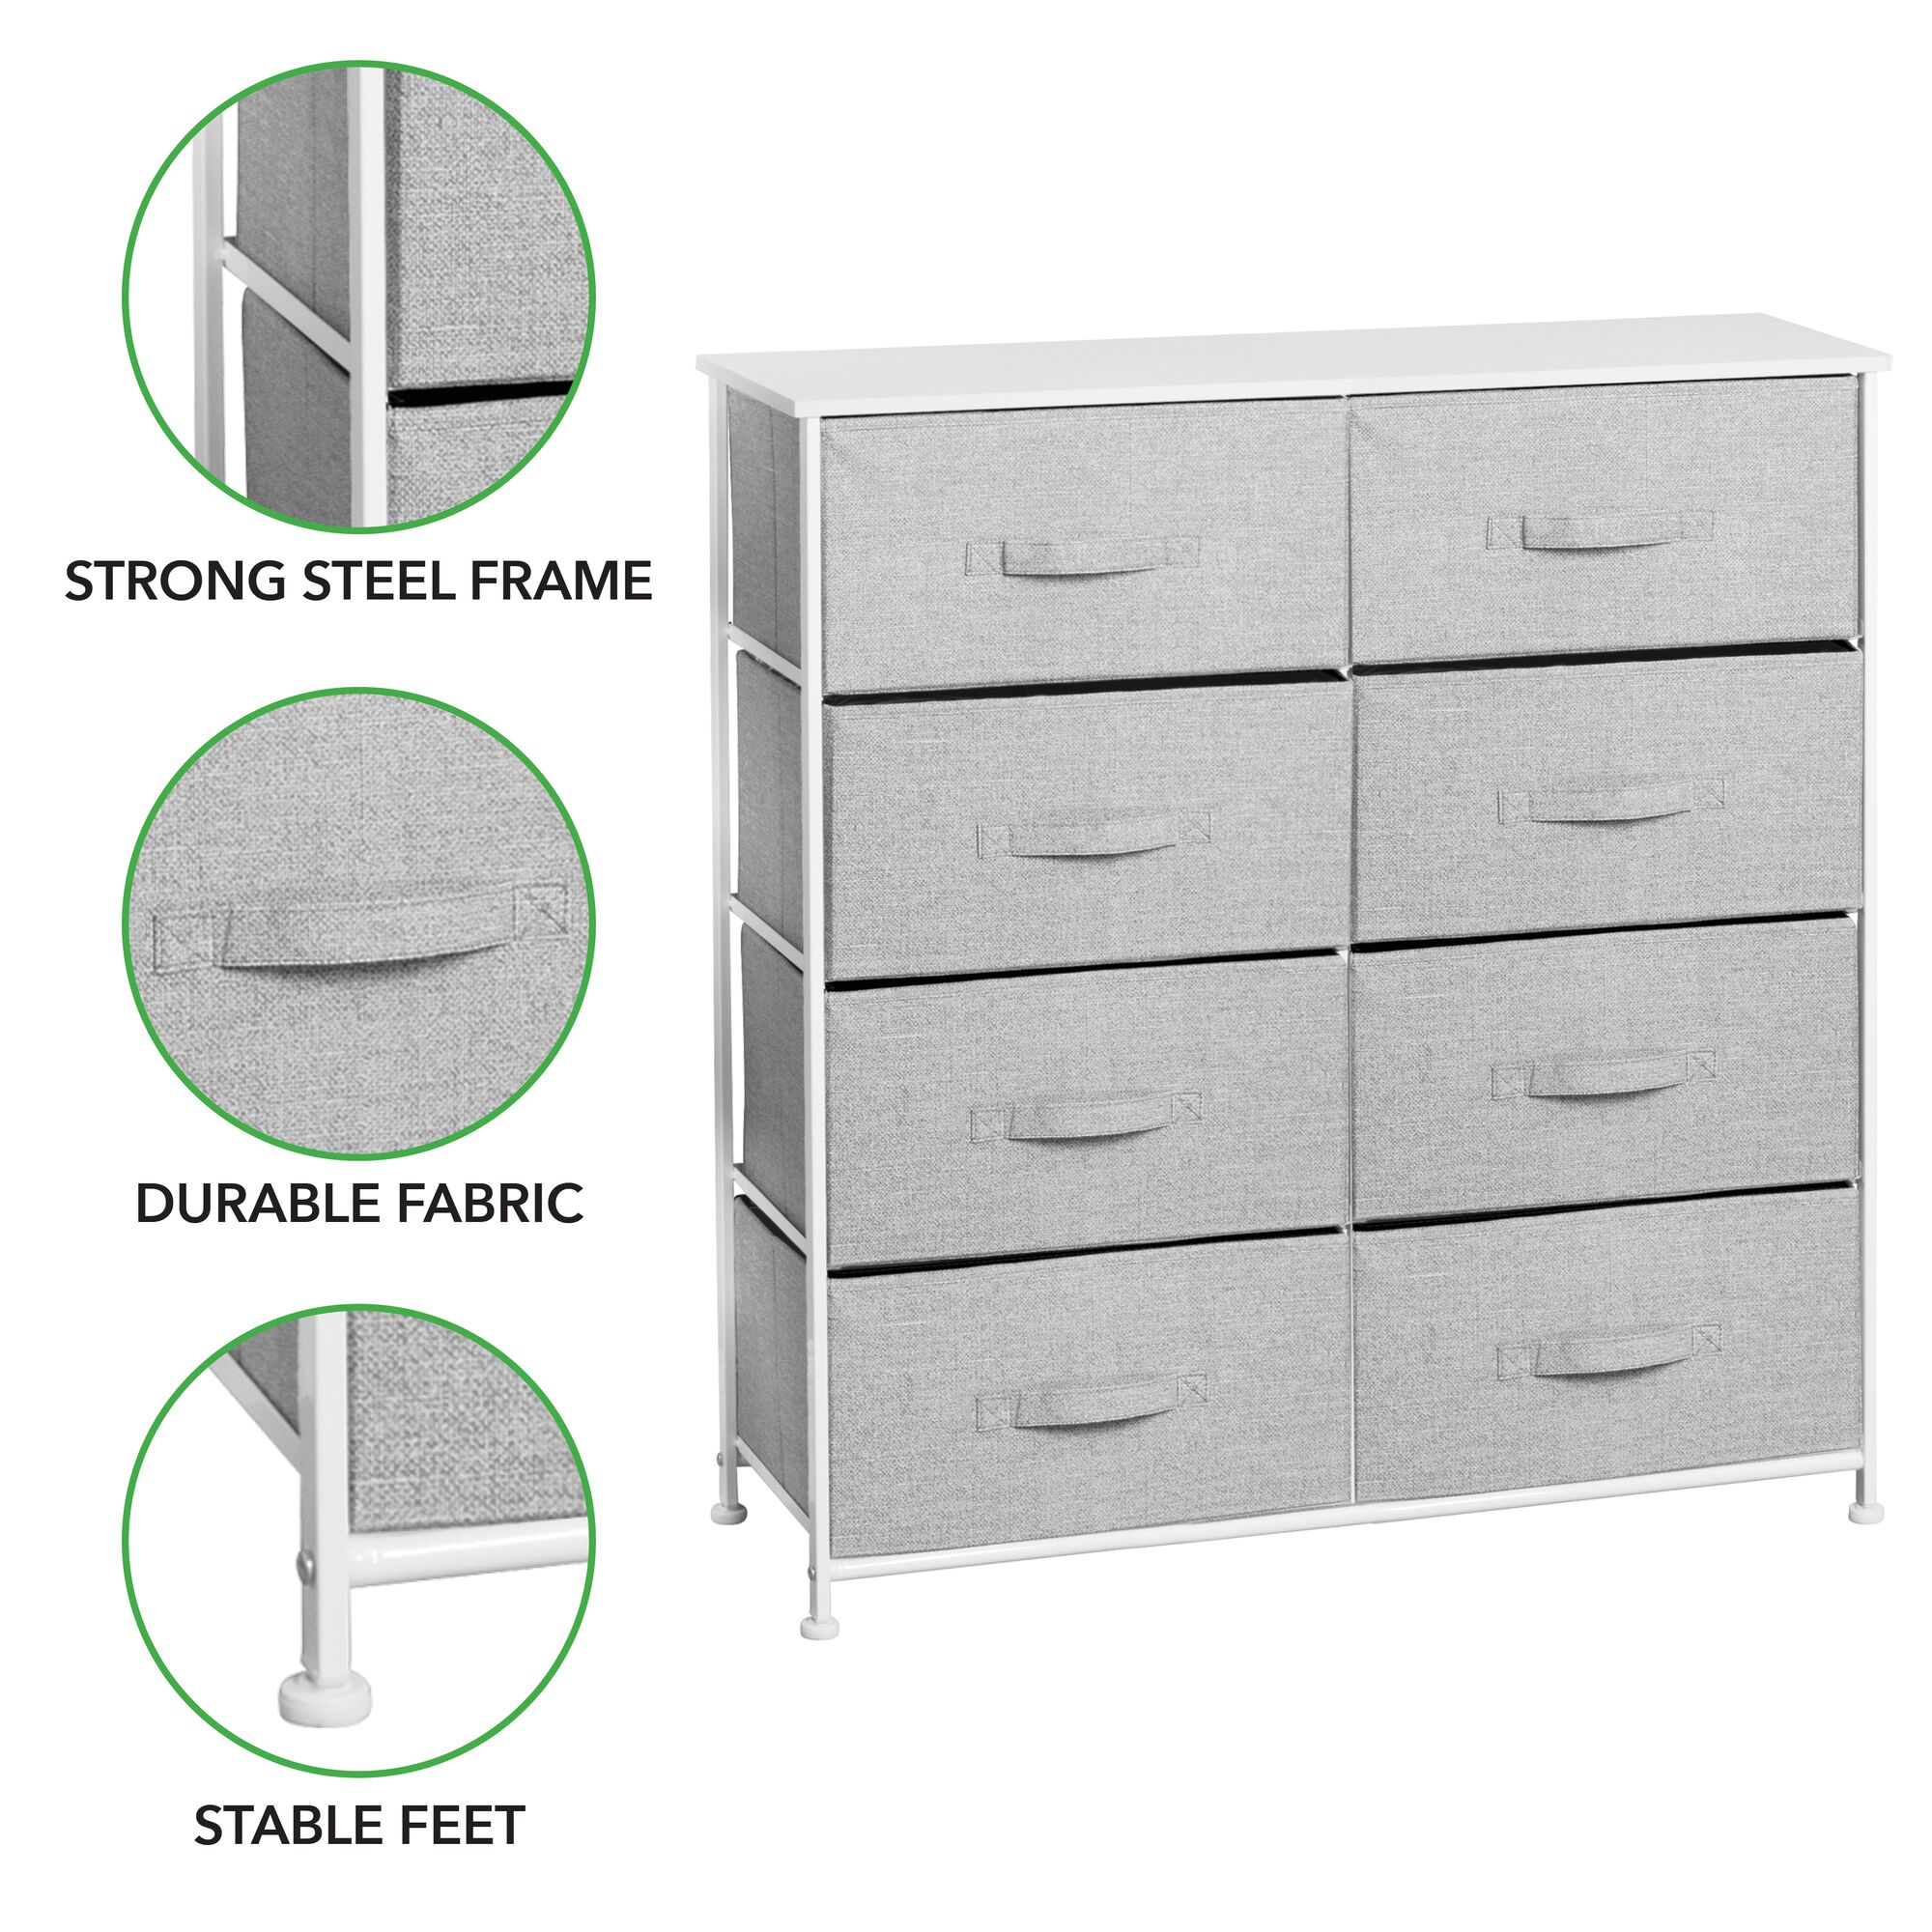 mDesign Large Storage Dresser Furniture with 8 Removable Fabric Drawers, Gray - image 3 of 6